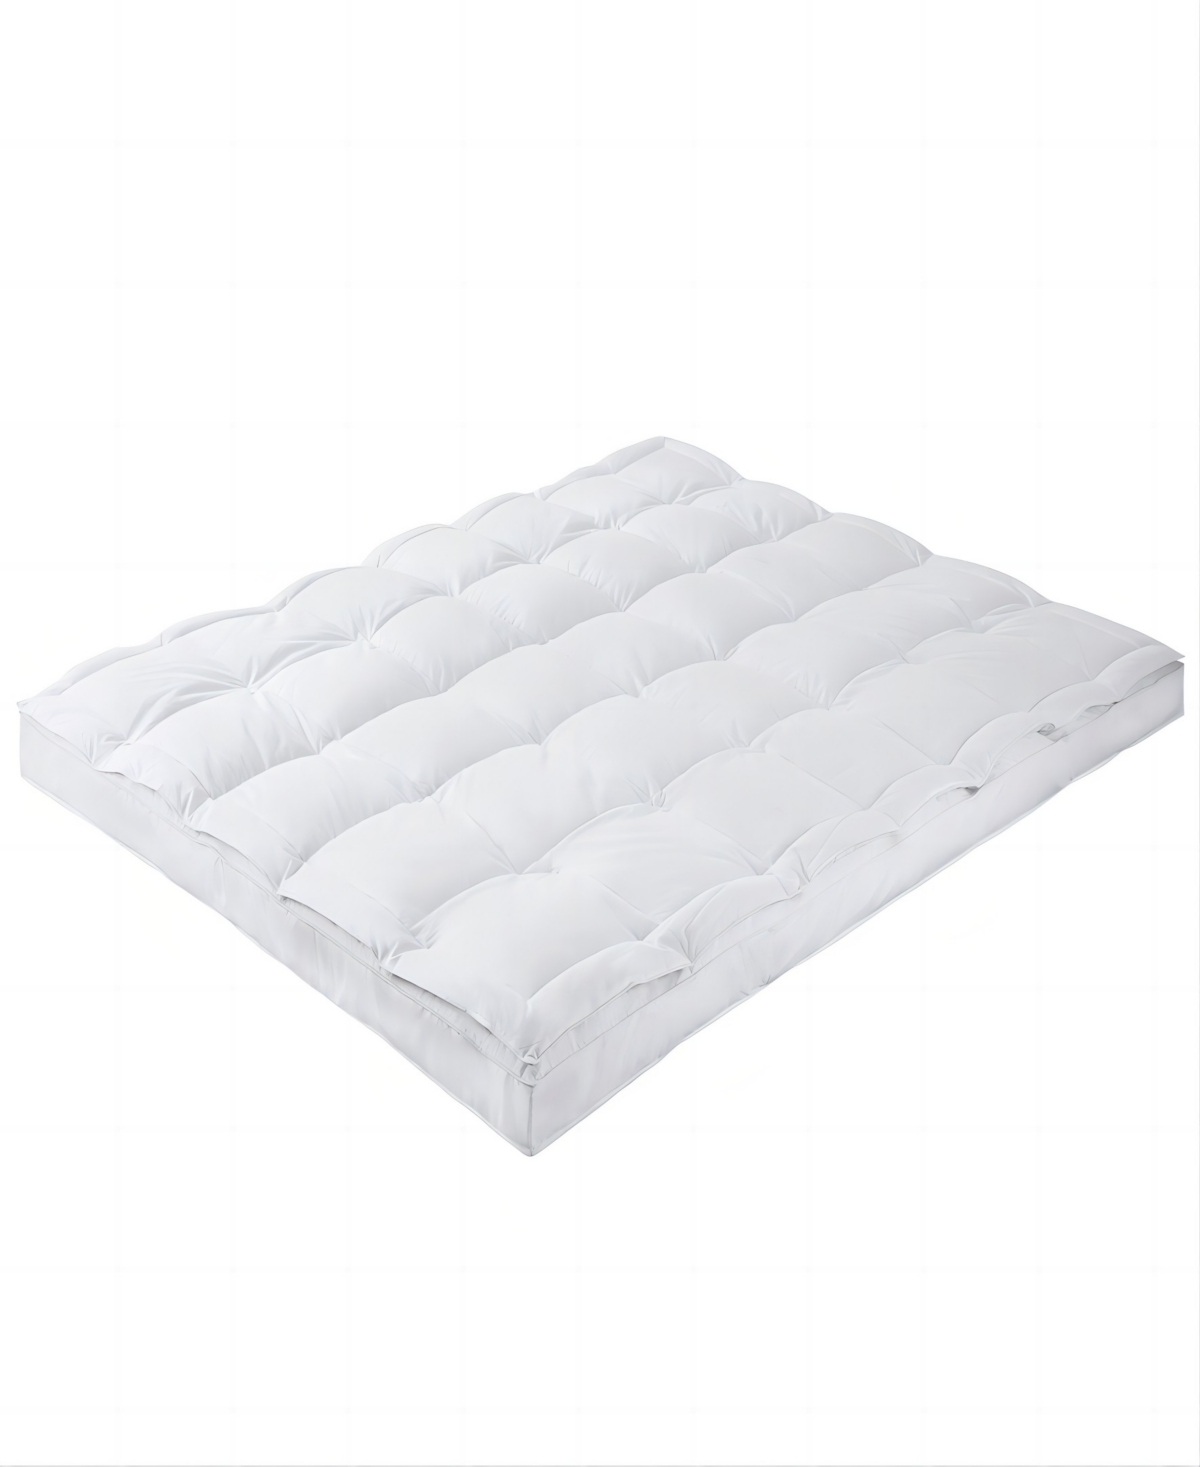 Unikome 3" Goose Feather Bed Mattress Topper With 300 Thread Count Cotton Fabric, Queen In White